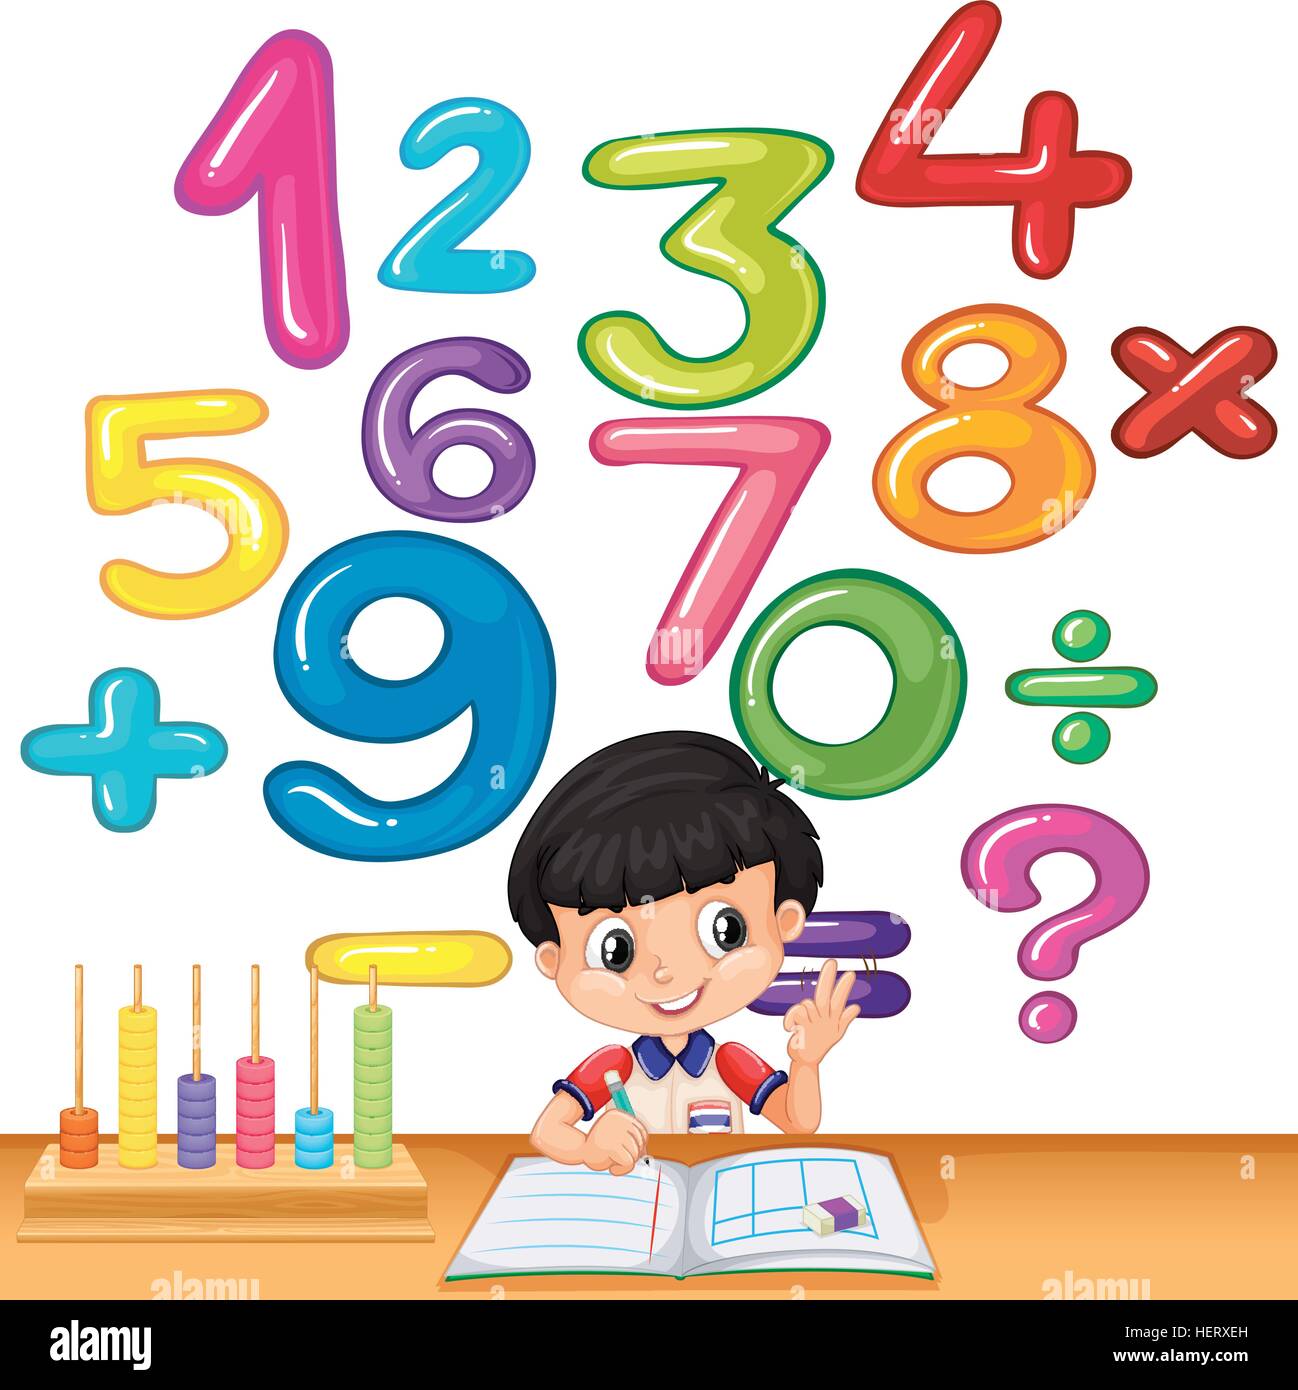 Boy counting numbers on the desk illustration Stock Vector